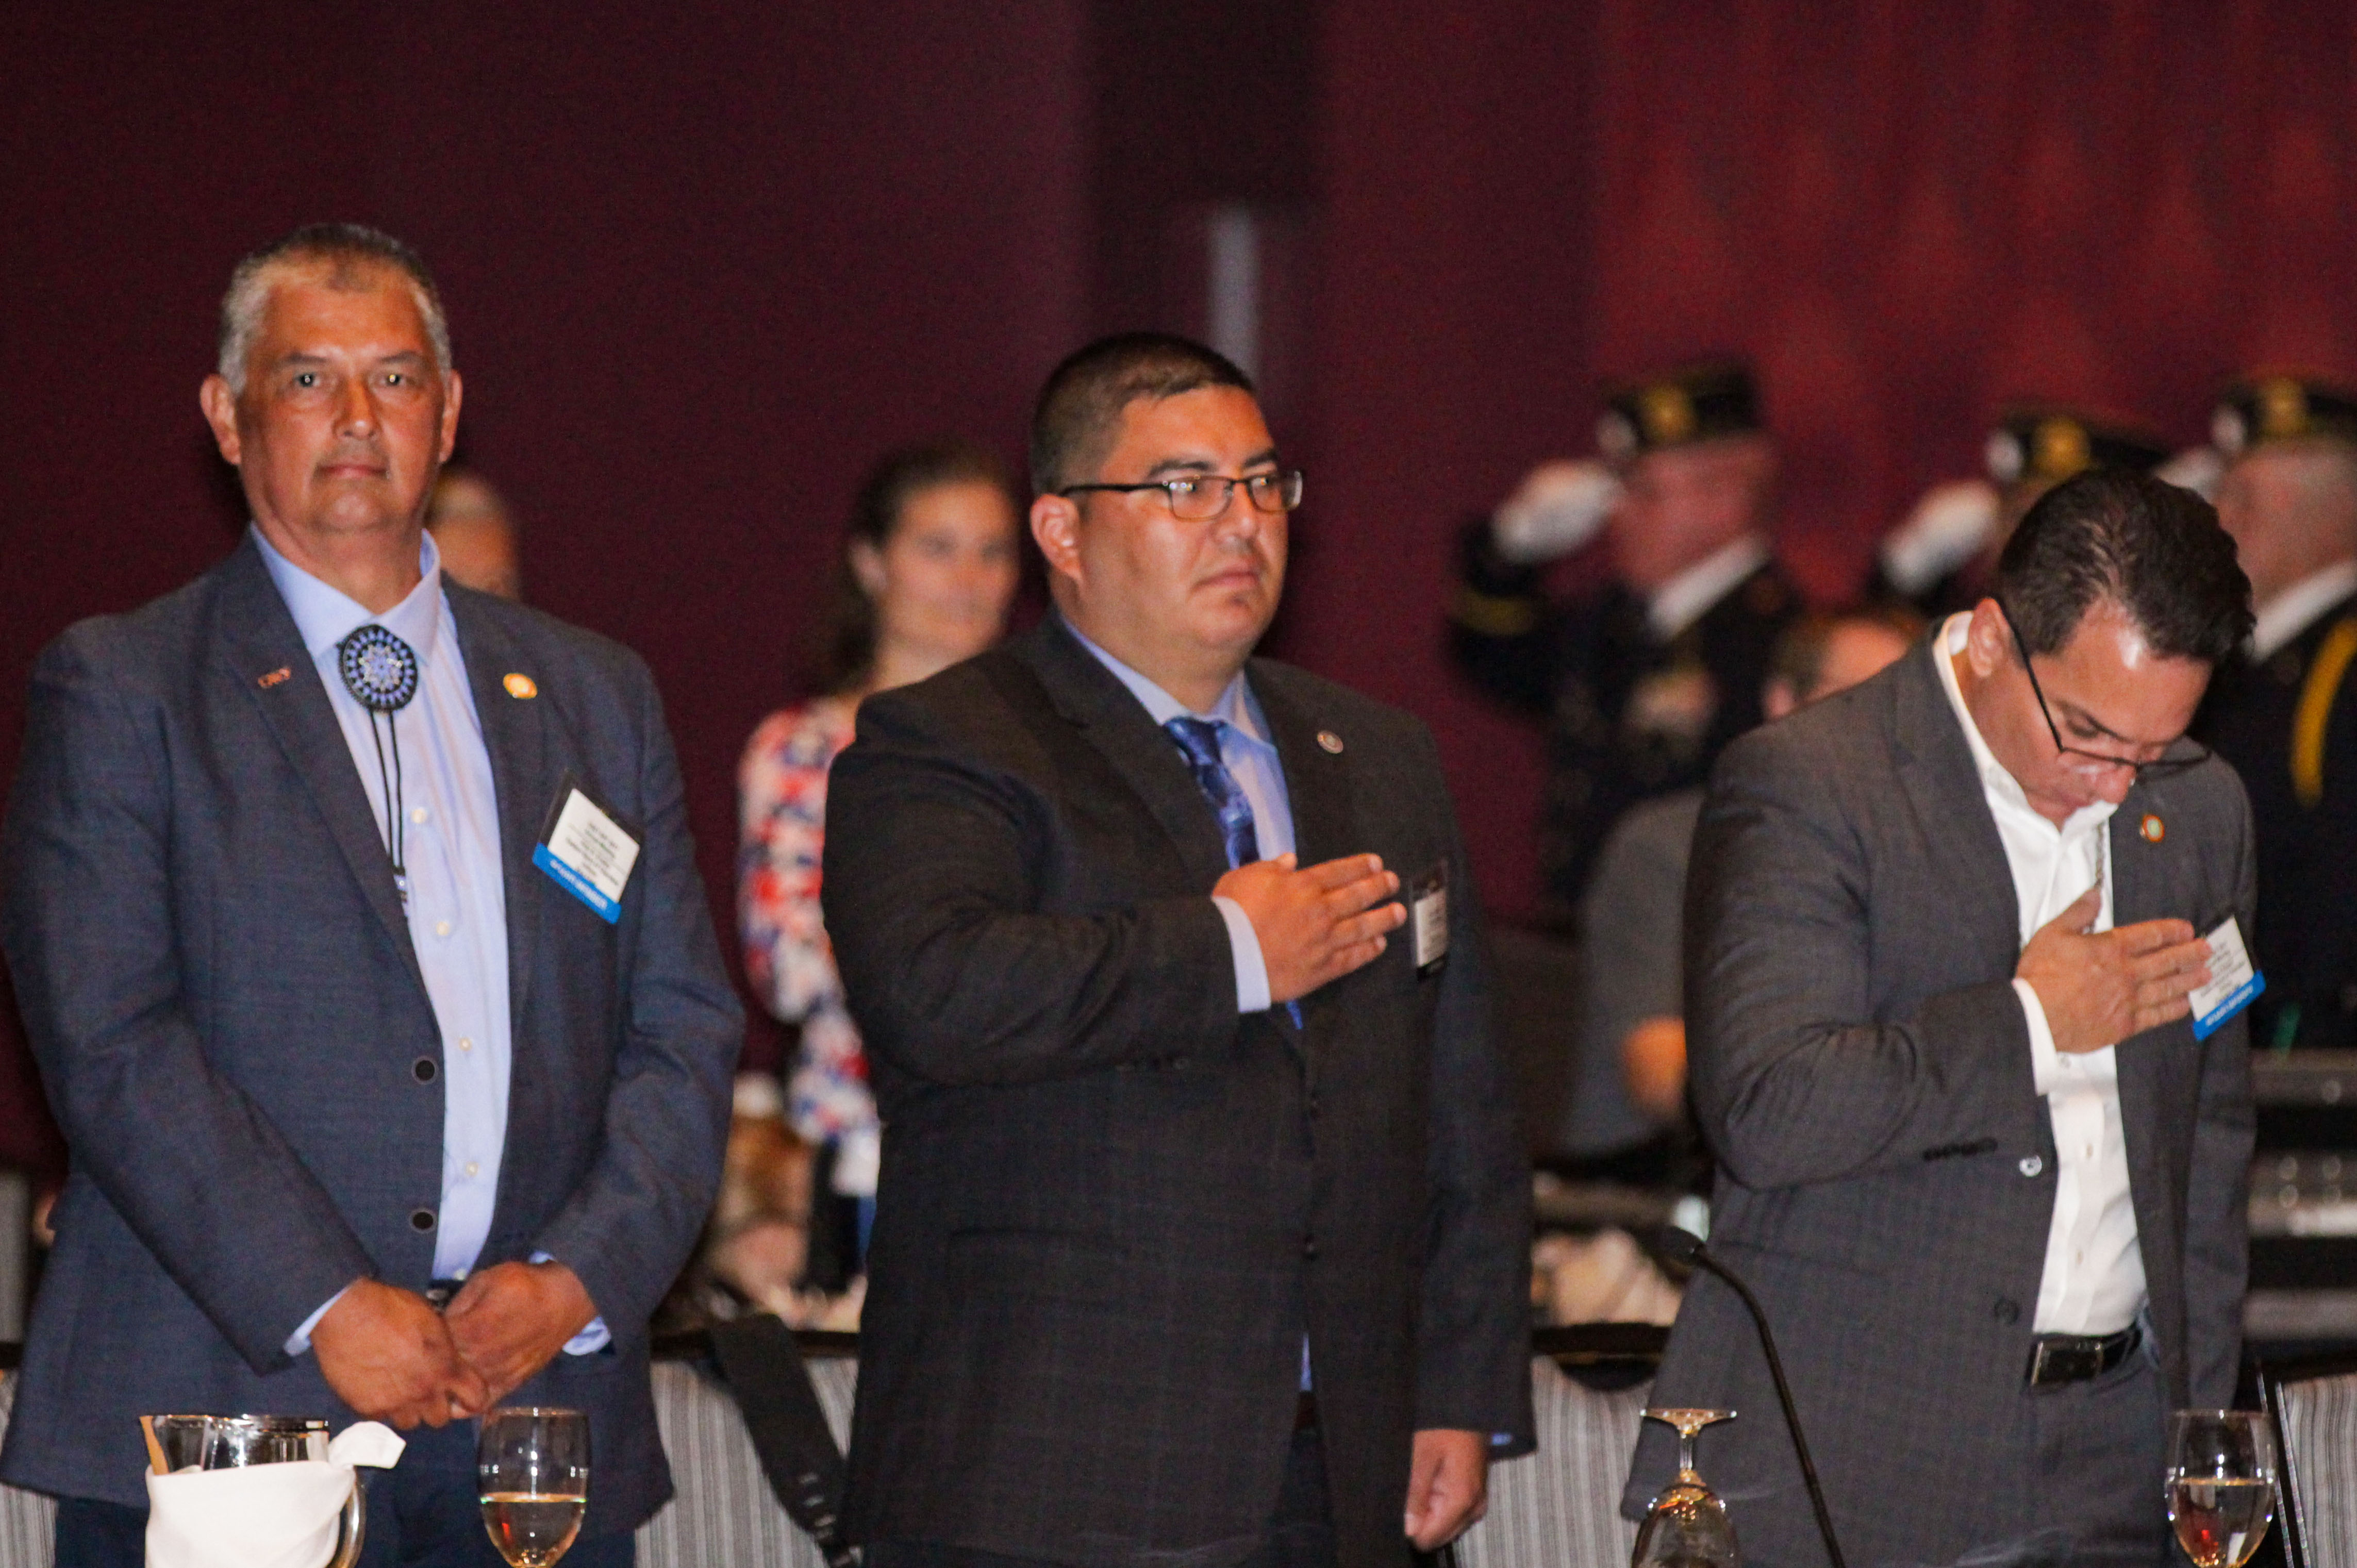 USET meeting opens in Cherokee - The Cherokee One Feather